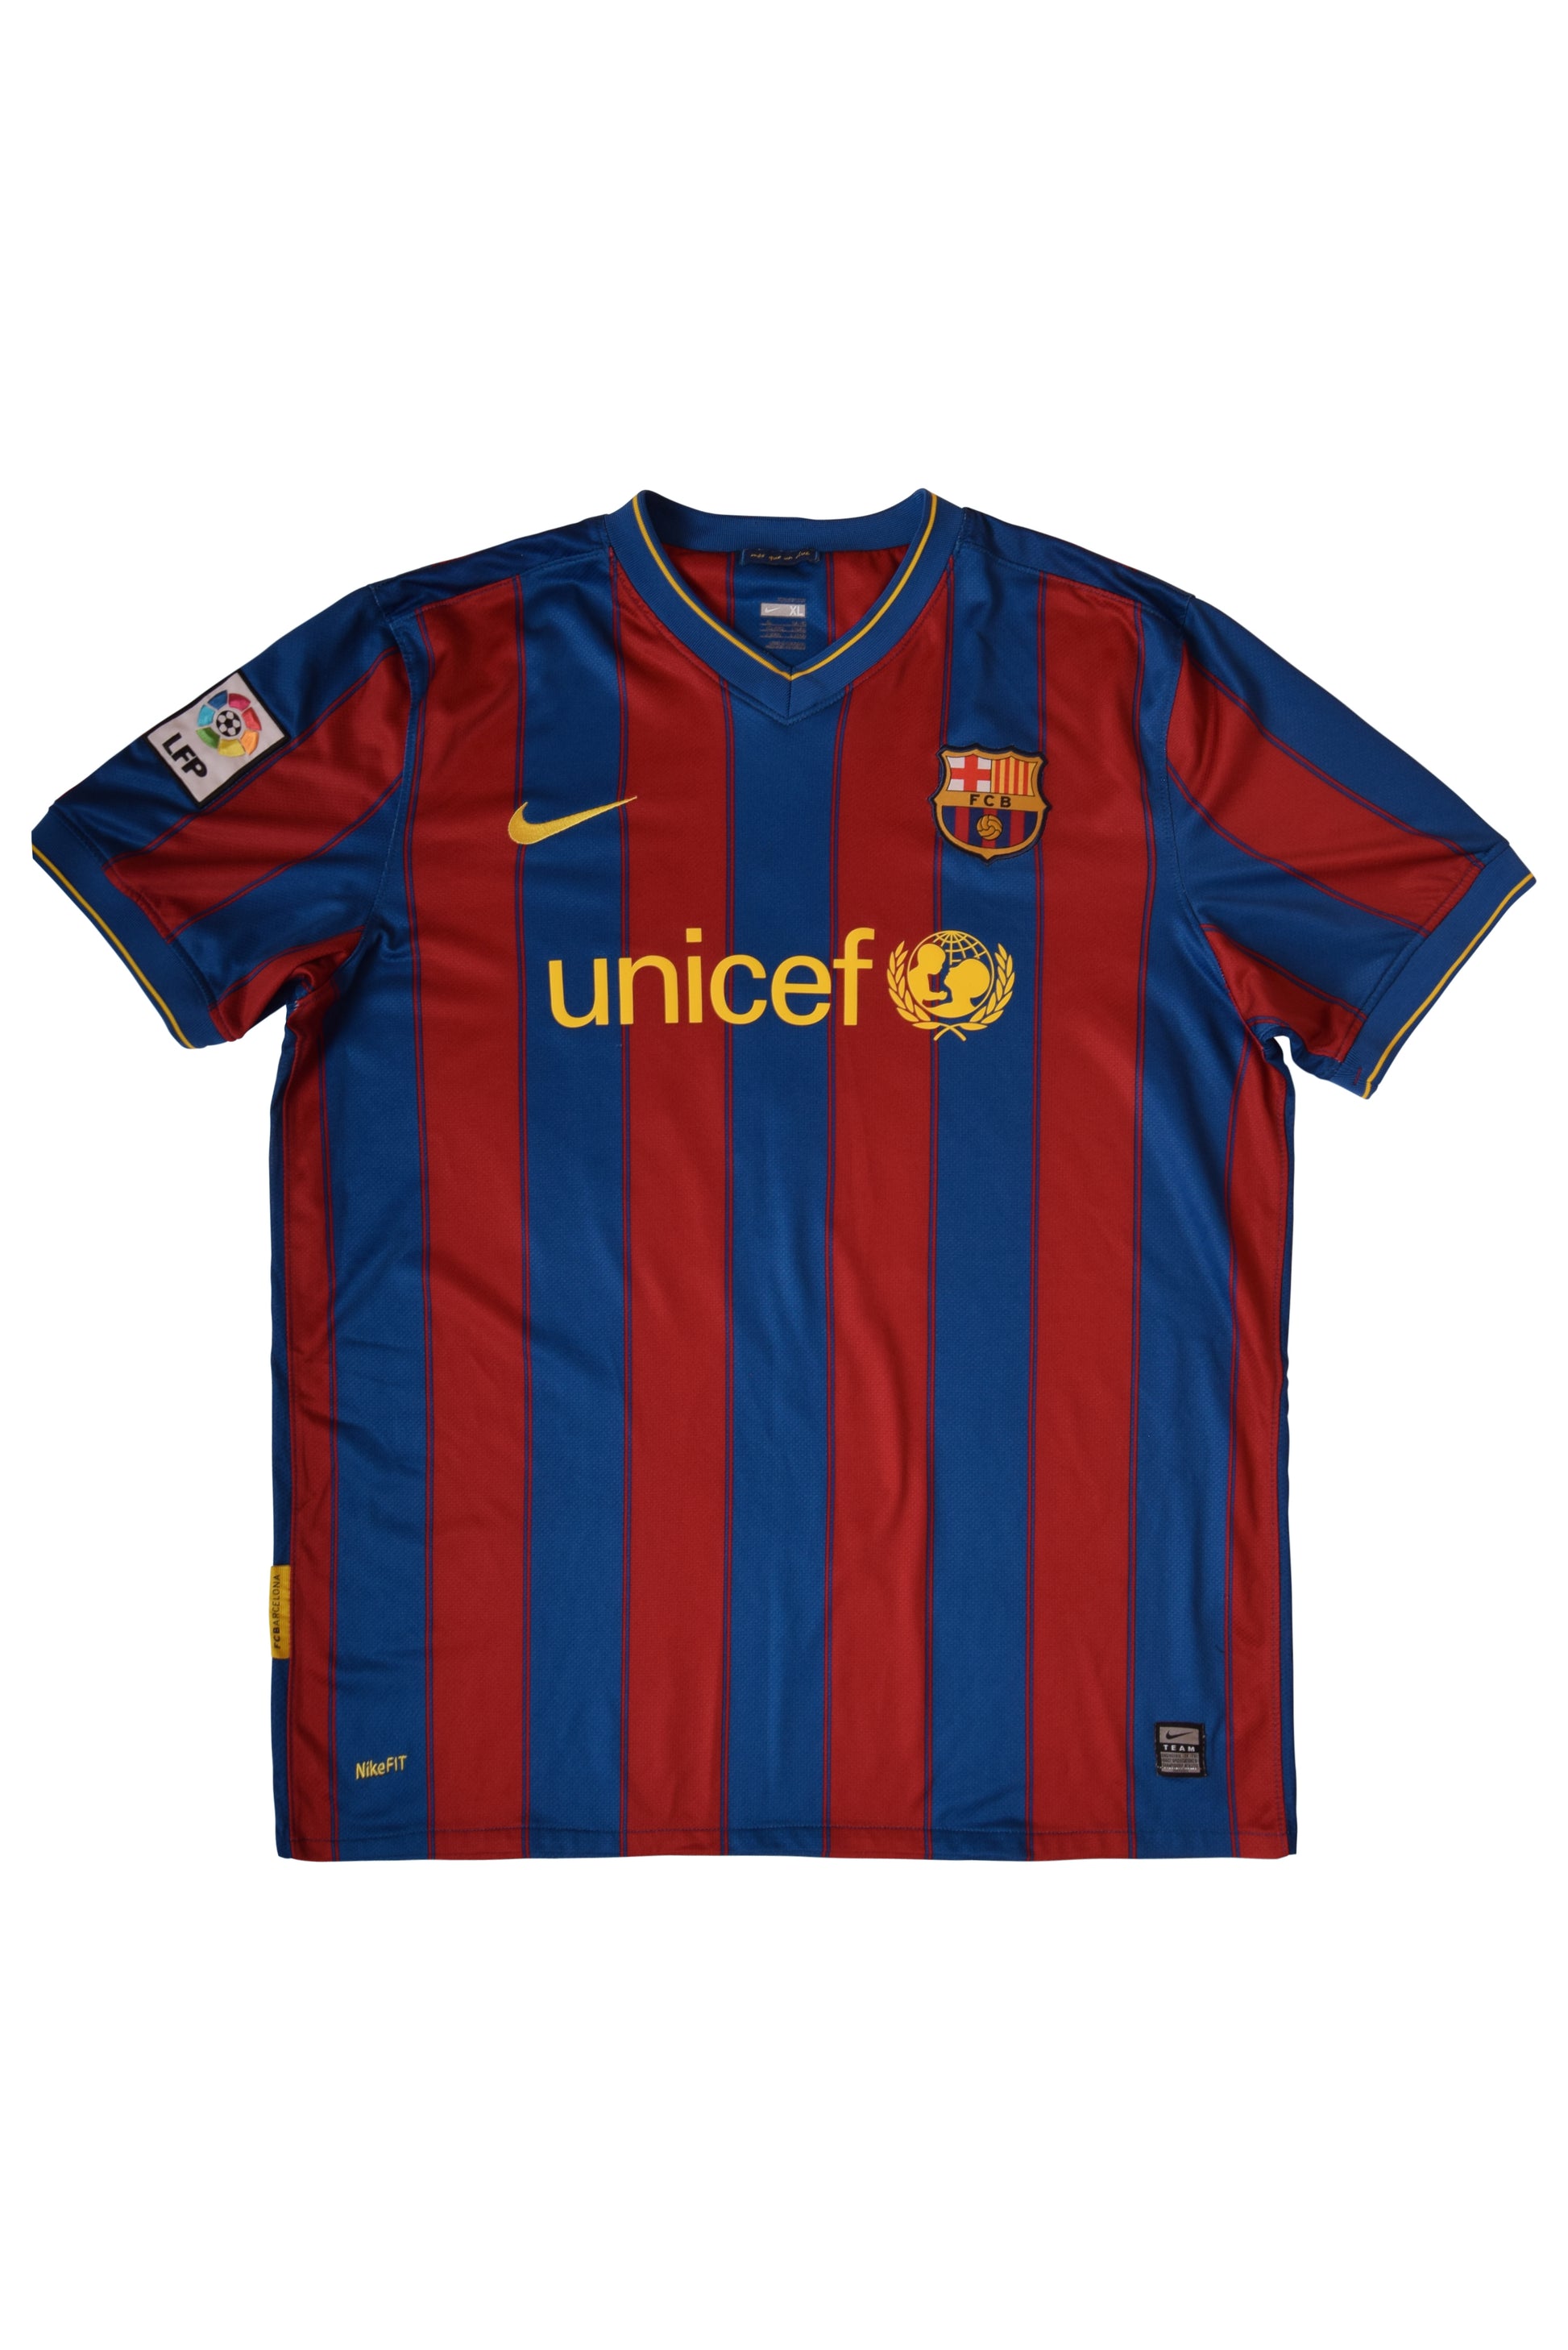 Messi FC Barcelona Nike Home Football Shirt 2009-2010 Size XL Red Blue